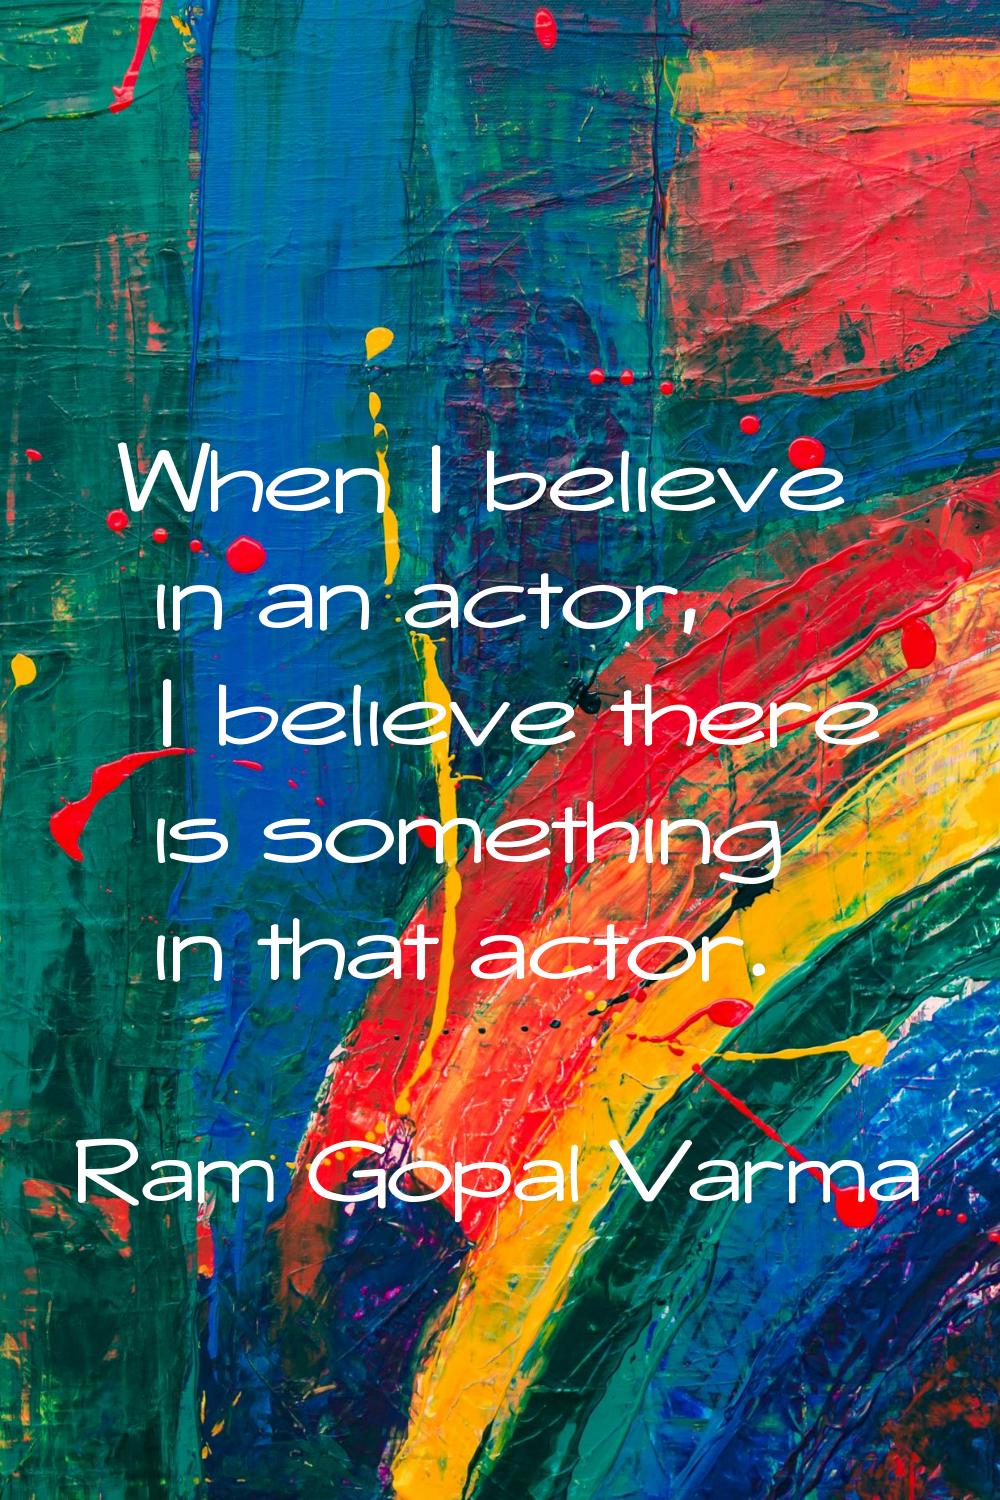 When I believe in an actor, I believe there is something in that actor.